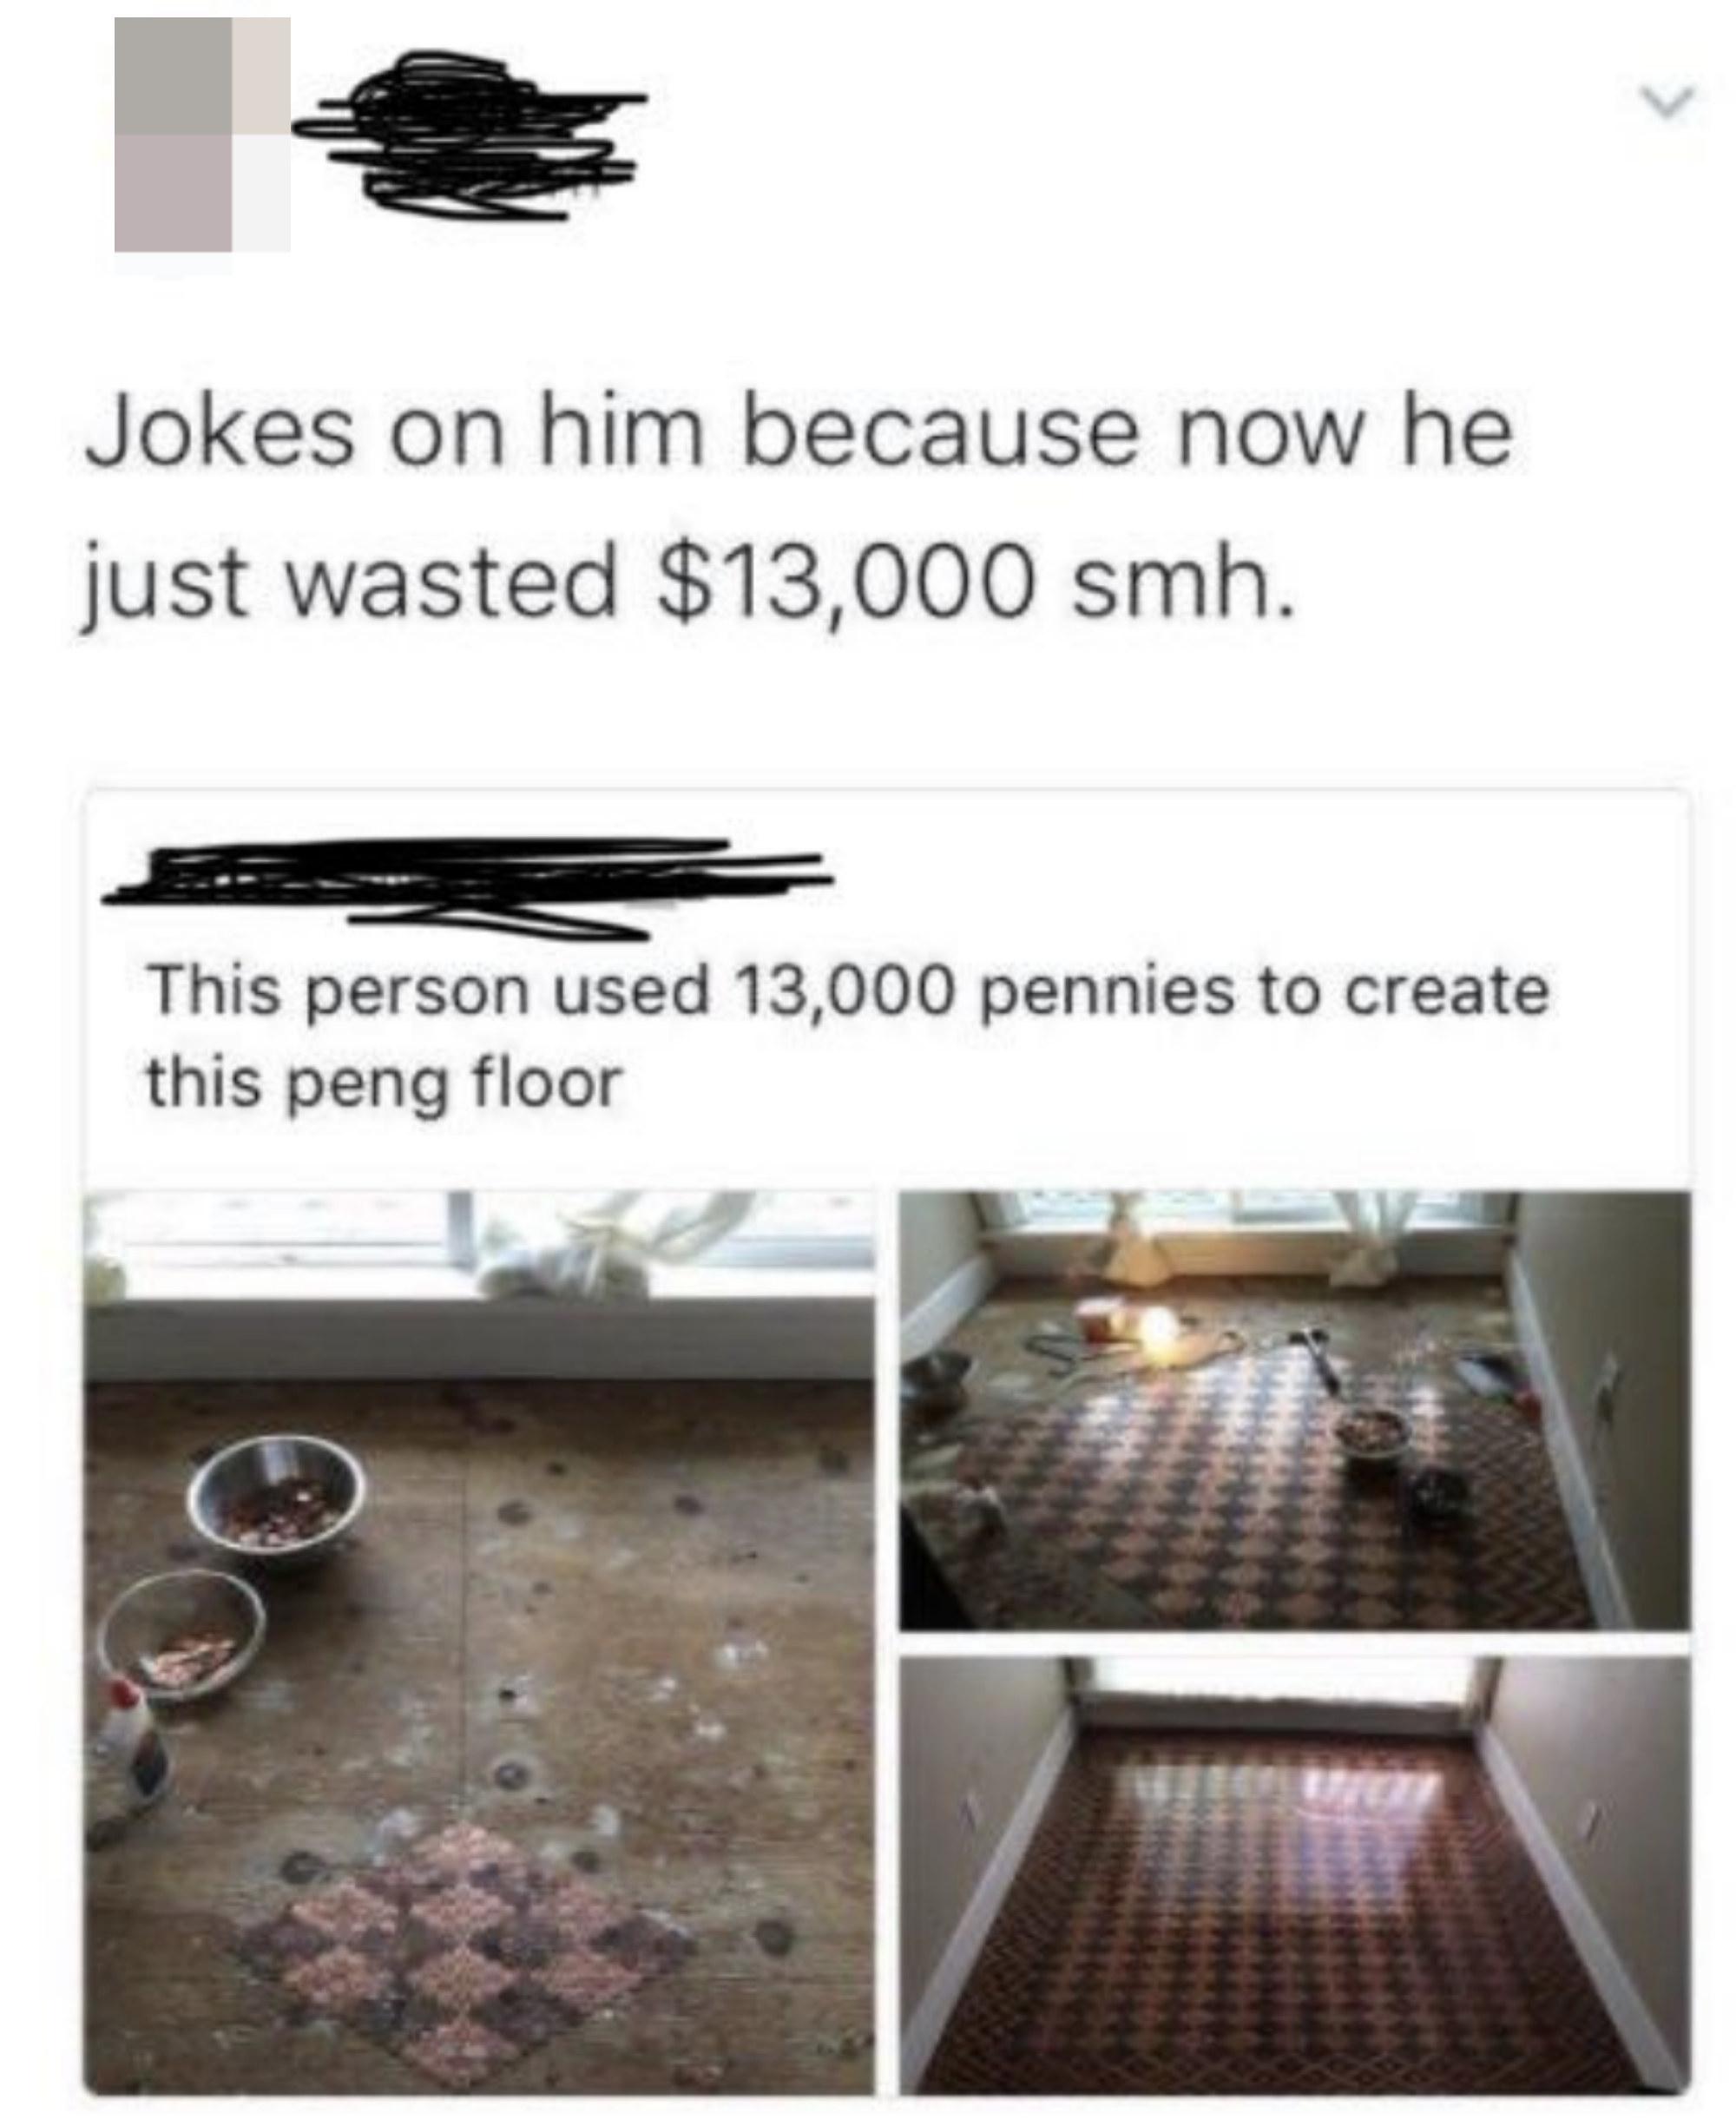 &quot;This person used 13,000 pennies to create this peng floor&quot;